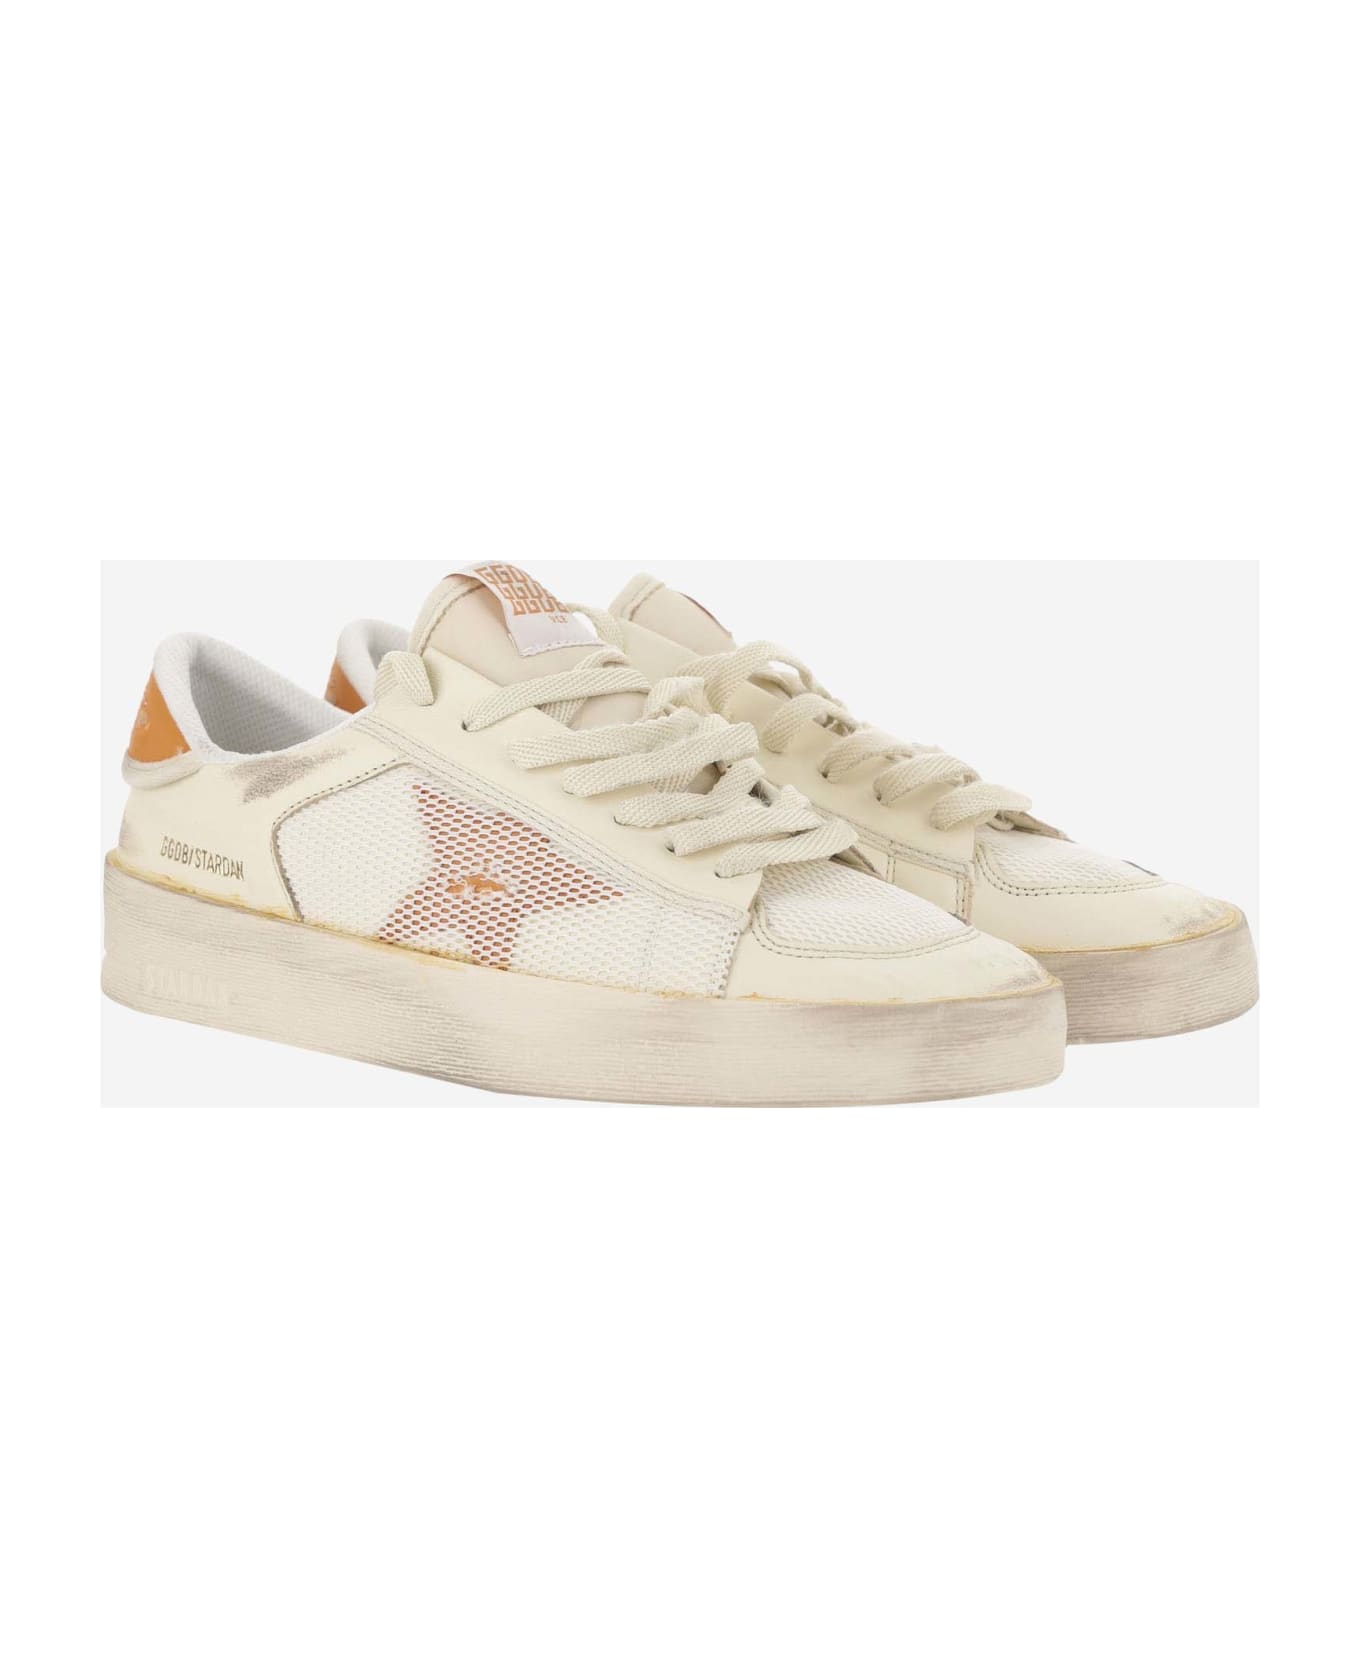 Golden Goose Stardan Sneakers With Distressed Effect - White